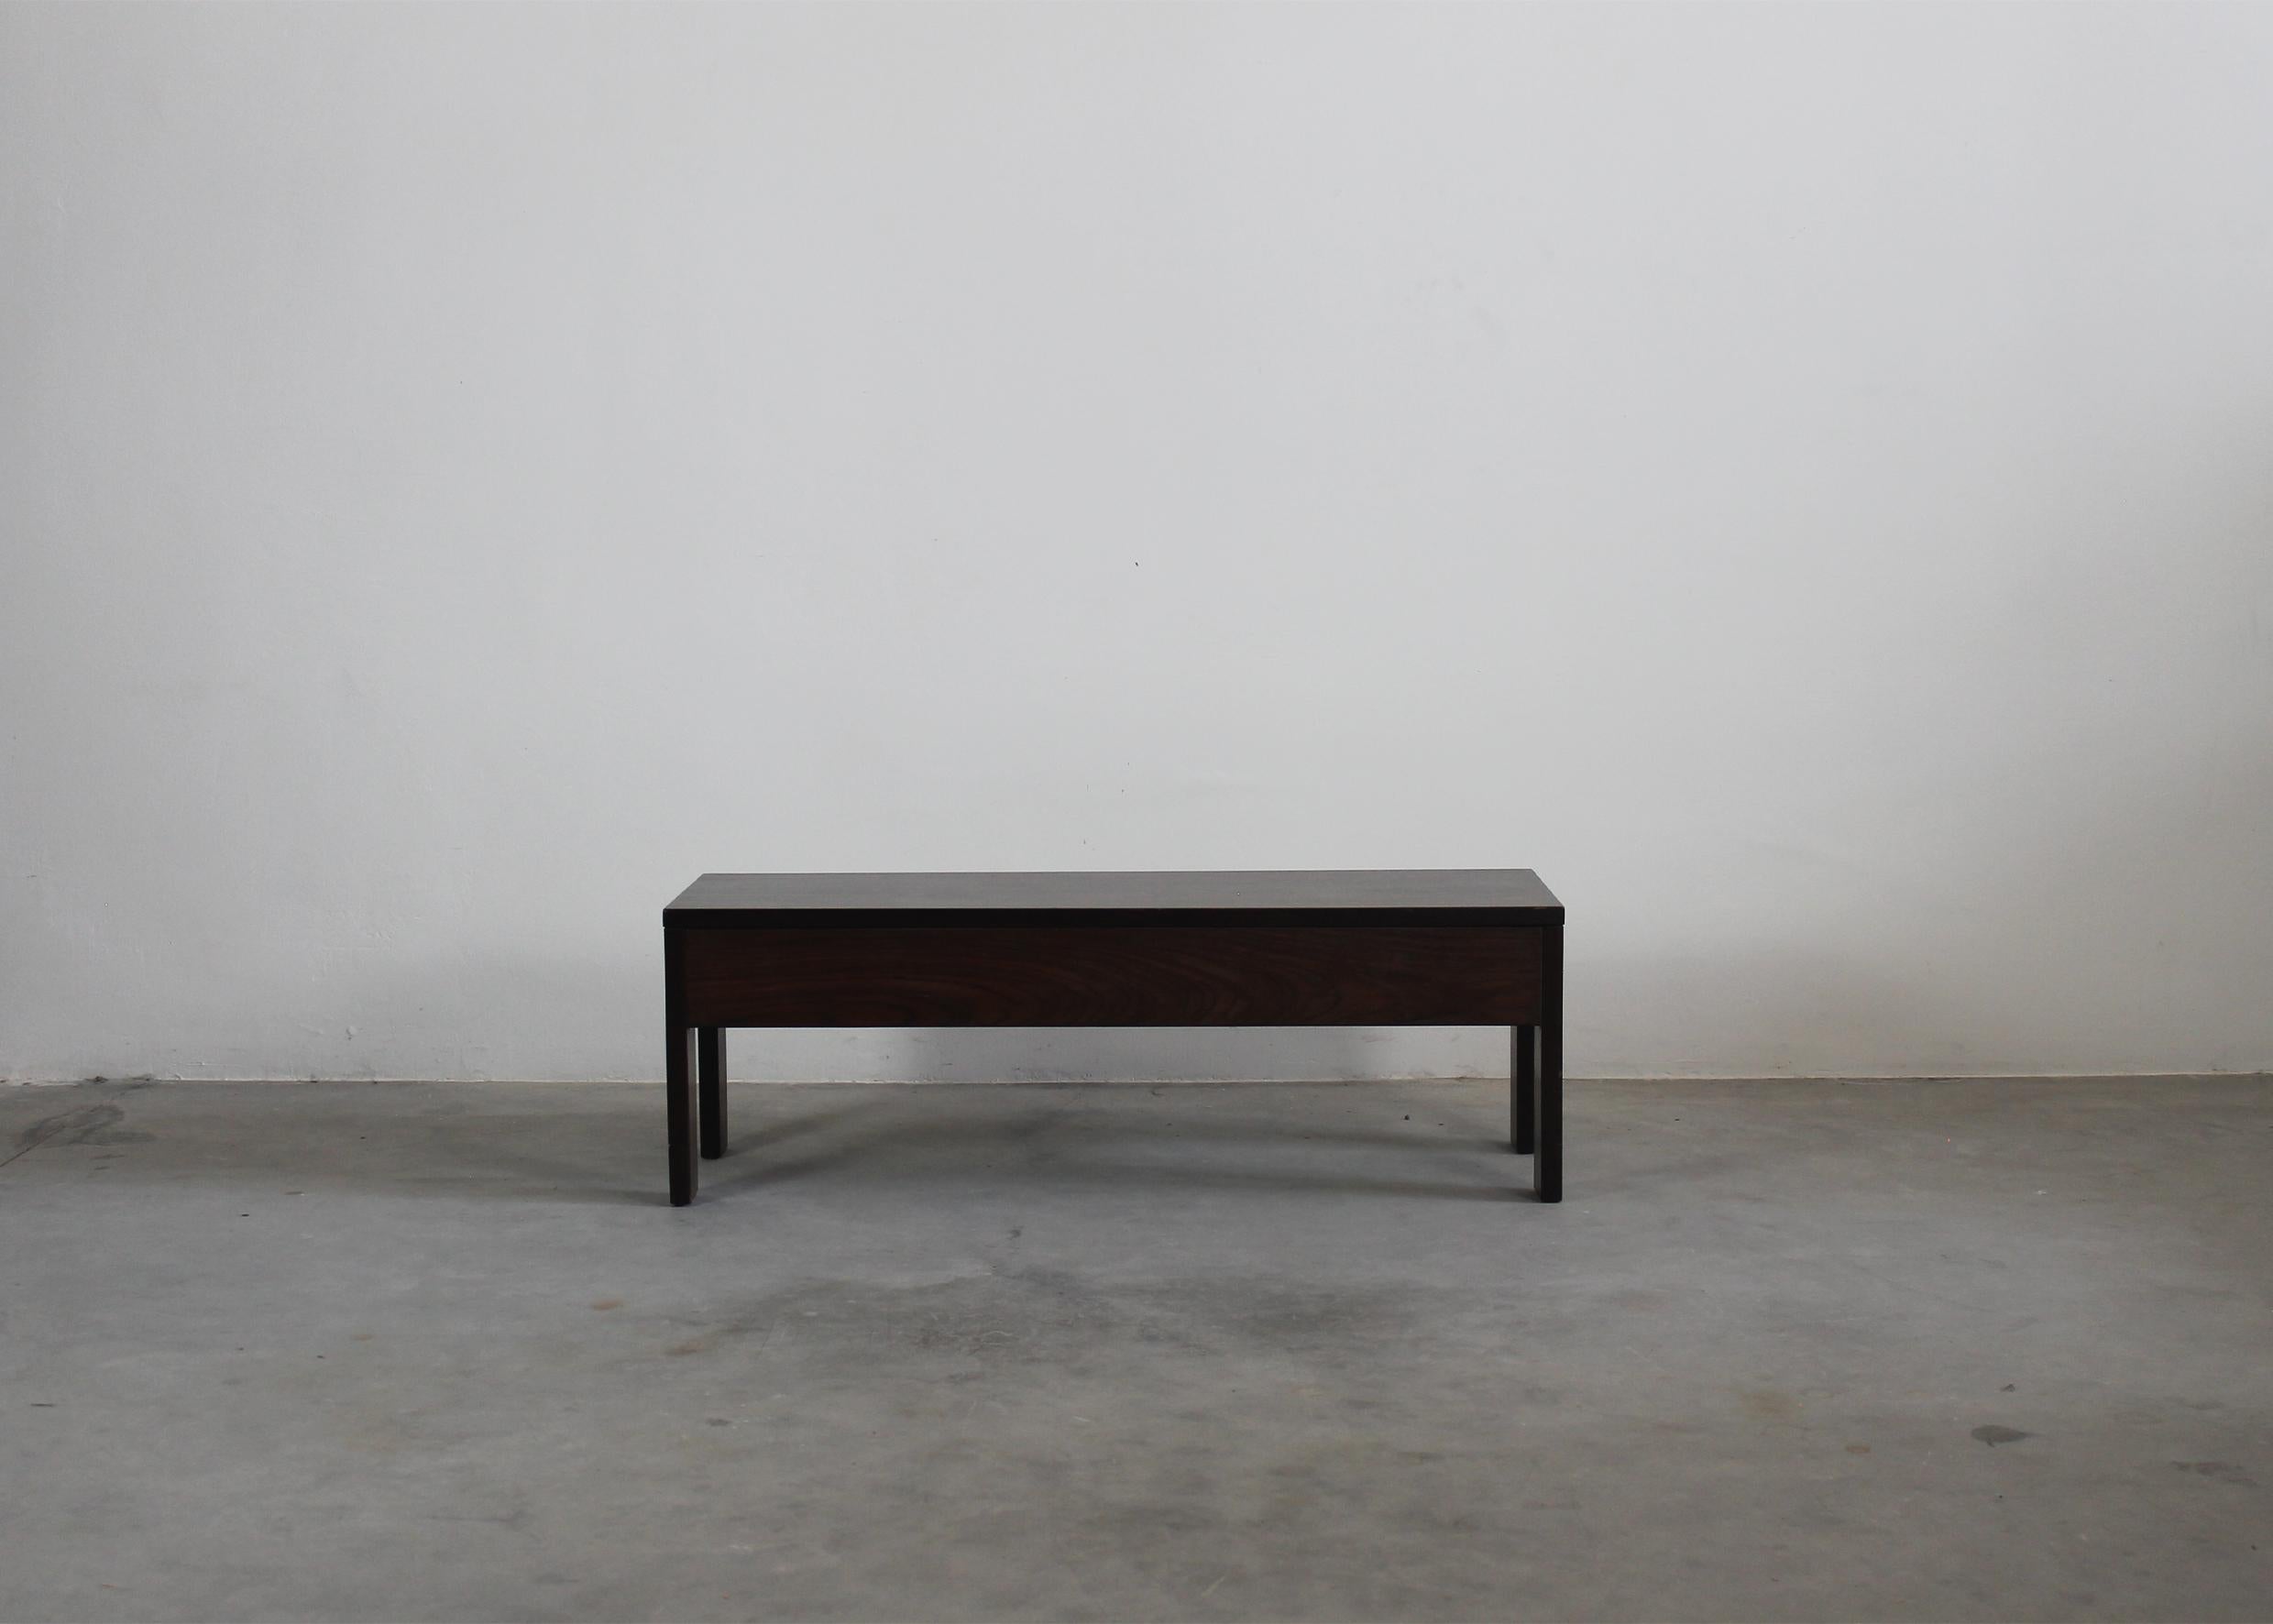 Italian Ettore Sottsass Rectangular Wooden Coffee Table by Poltronova 1960s Italy For Sale